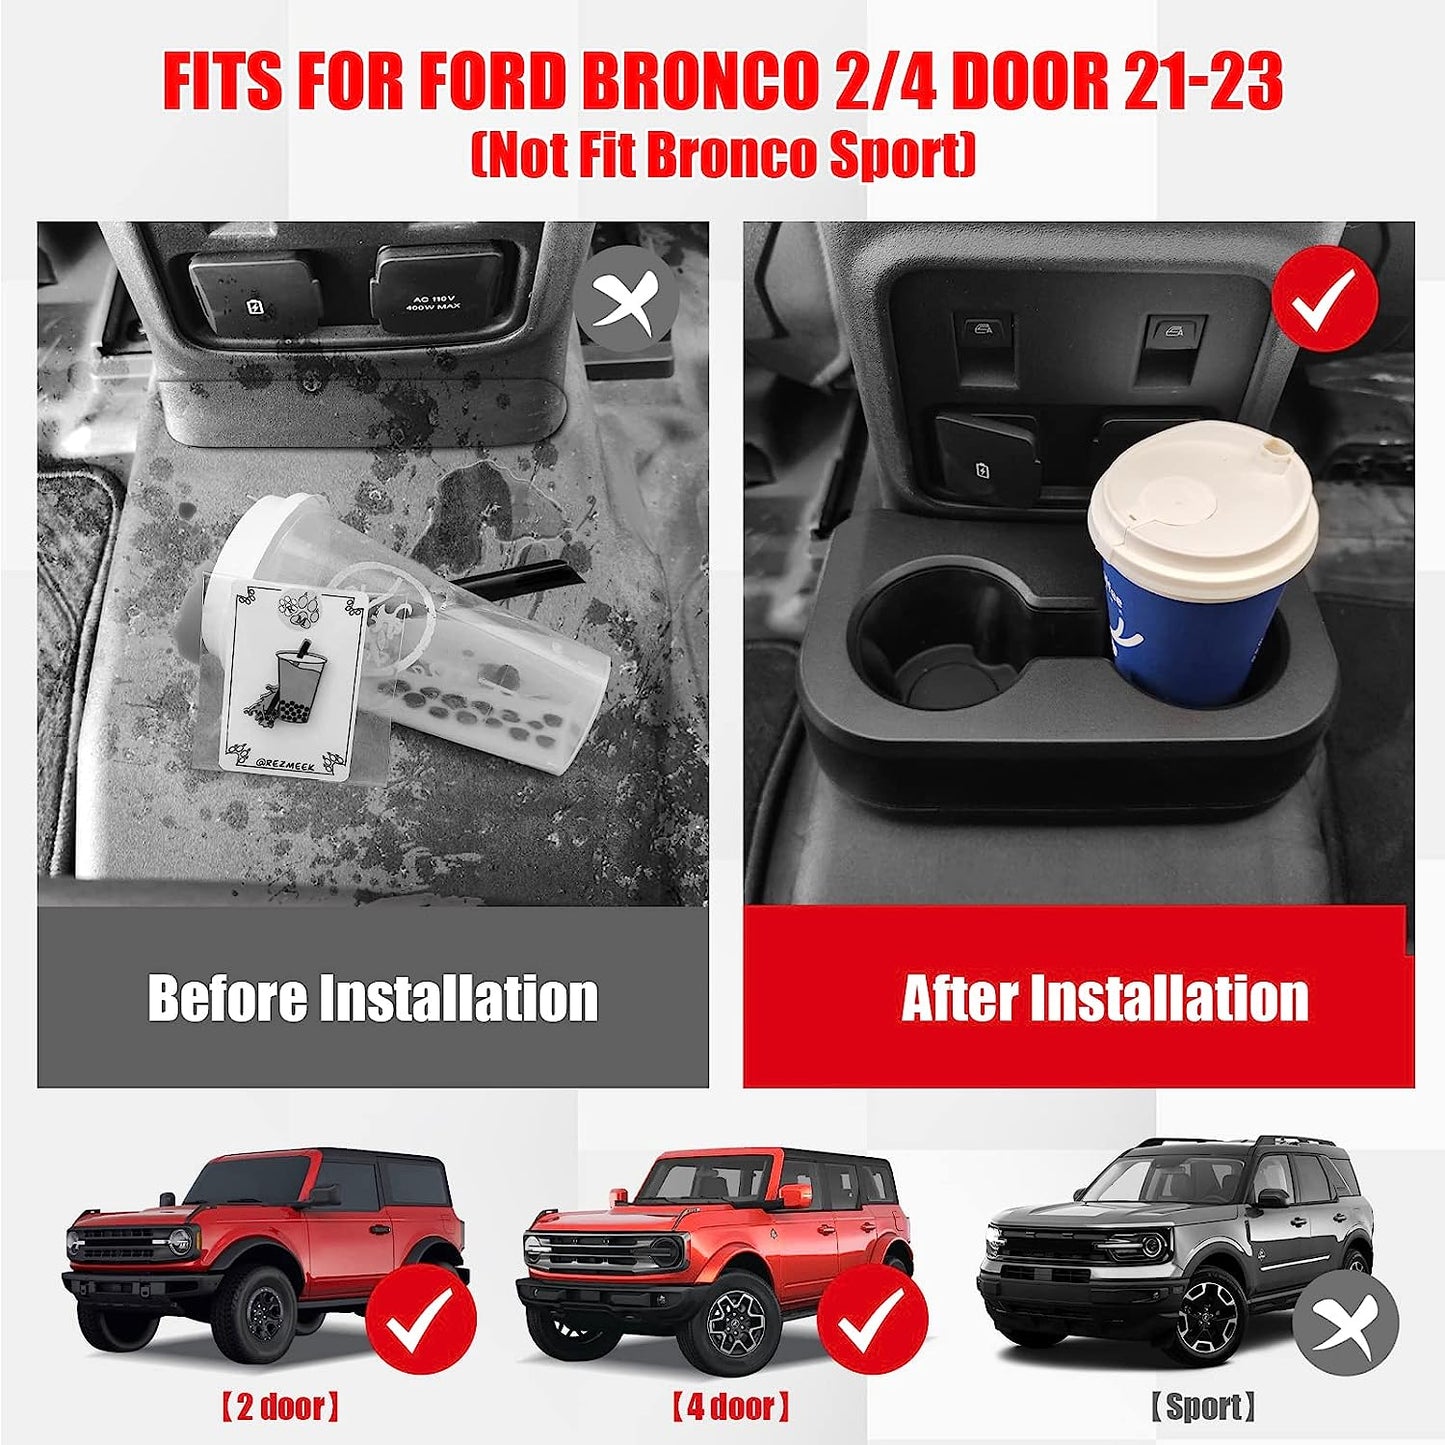 Removable Rear Dual Cup Holder for Ford Bronco 2021 2022 2023